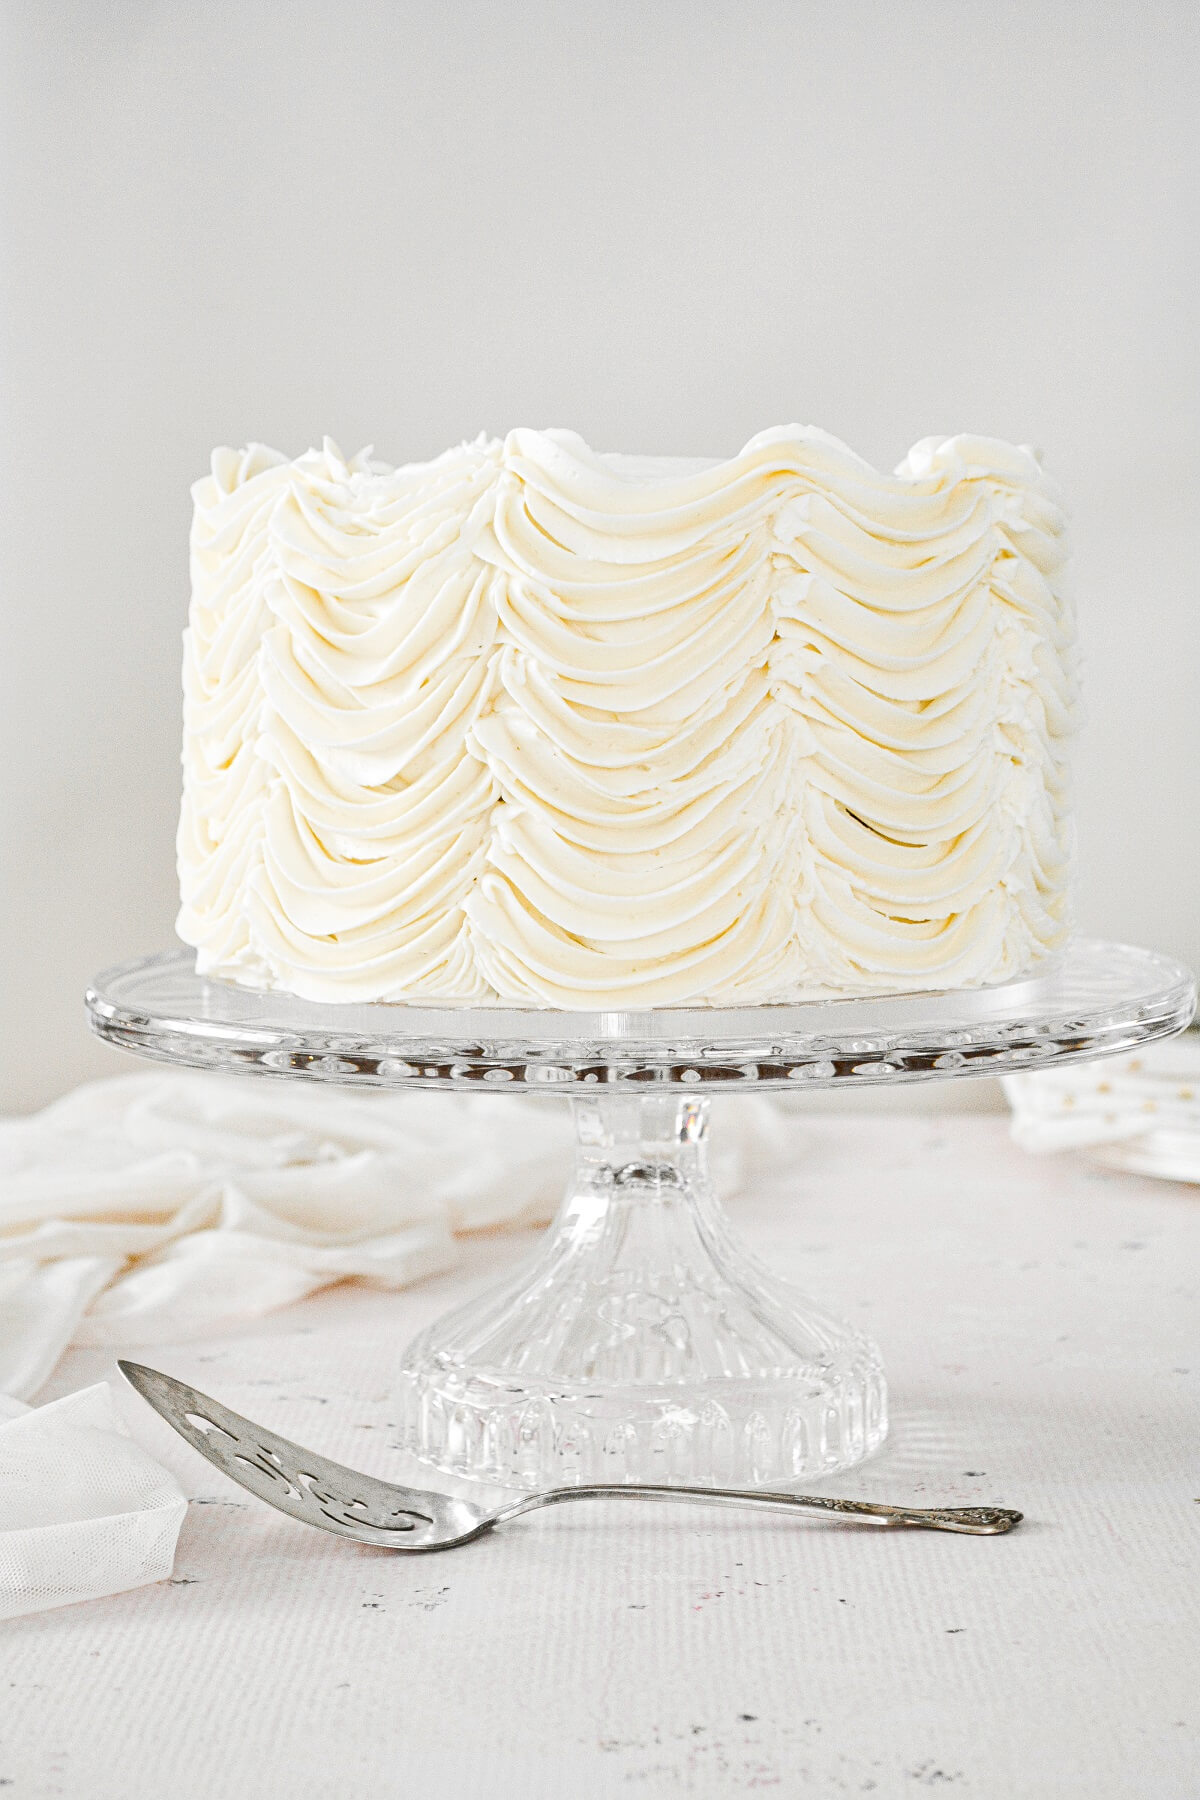 Cardamom cake with piped swoops of eggnog buttercream.